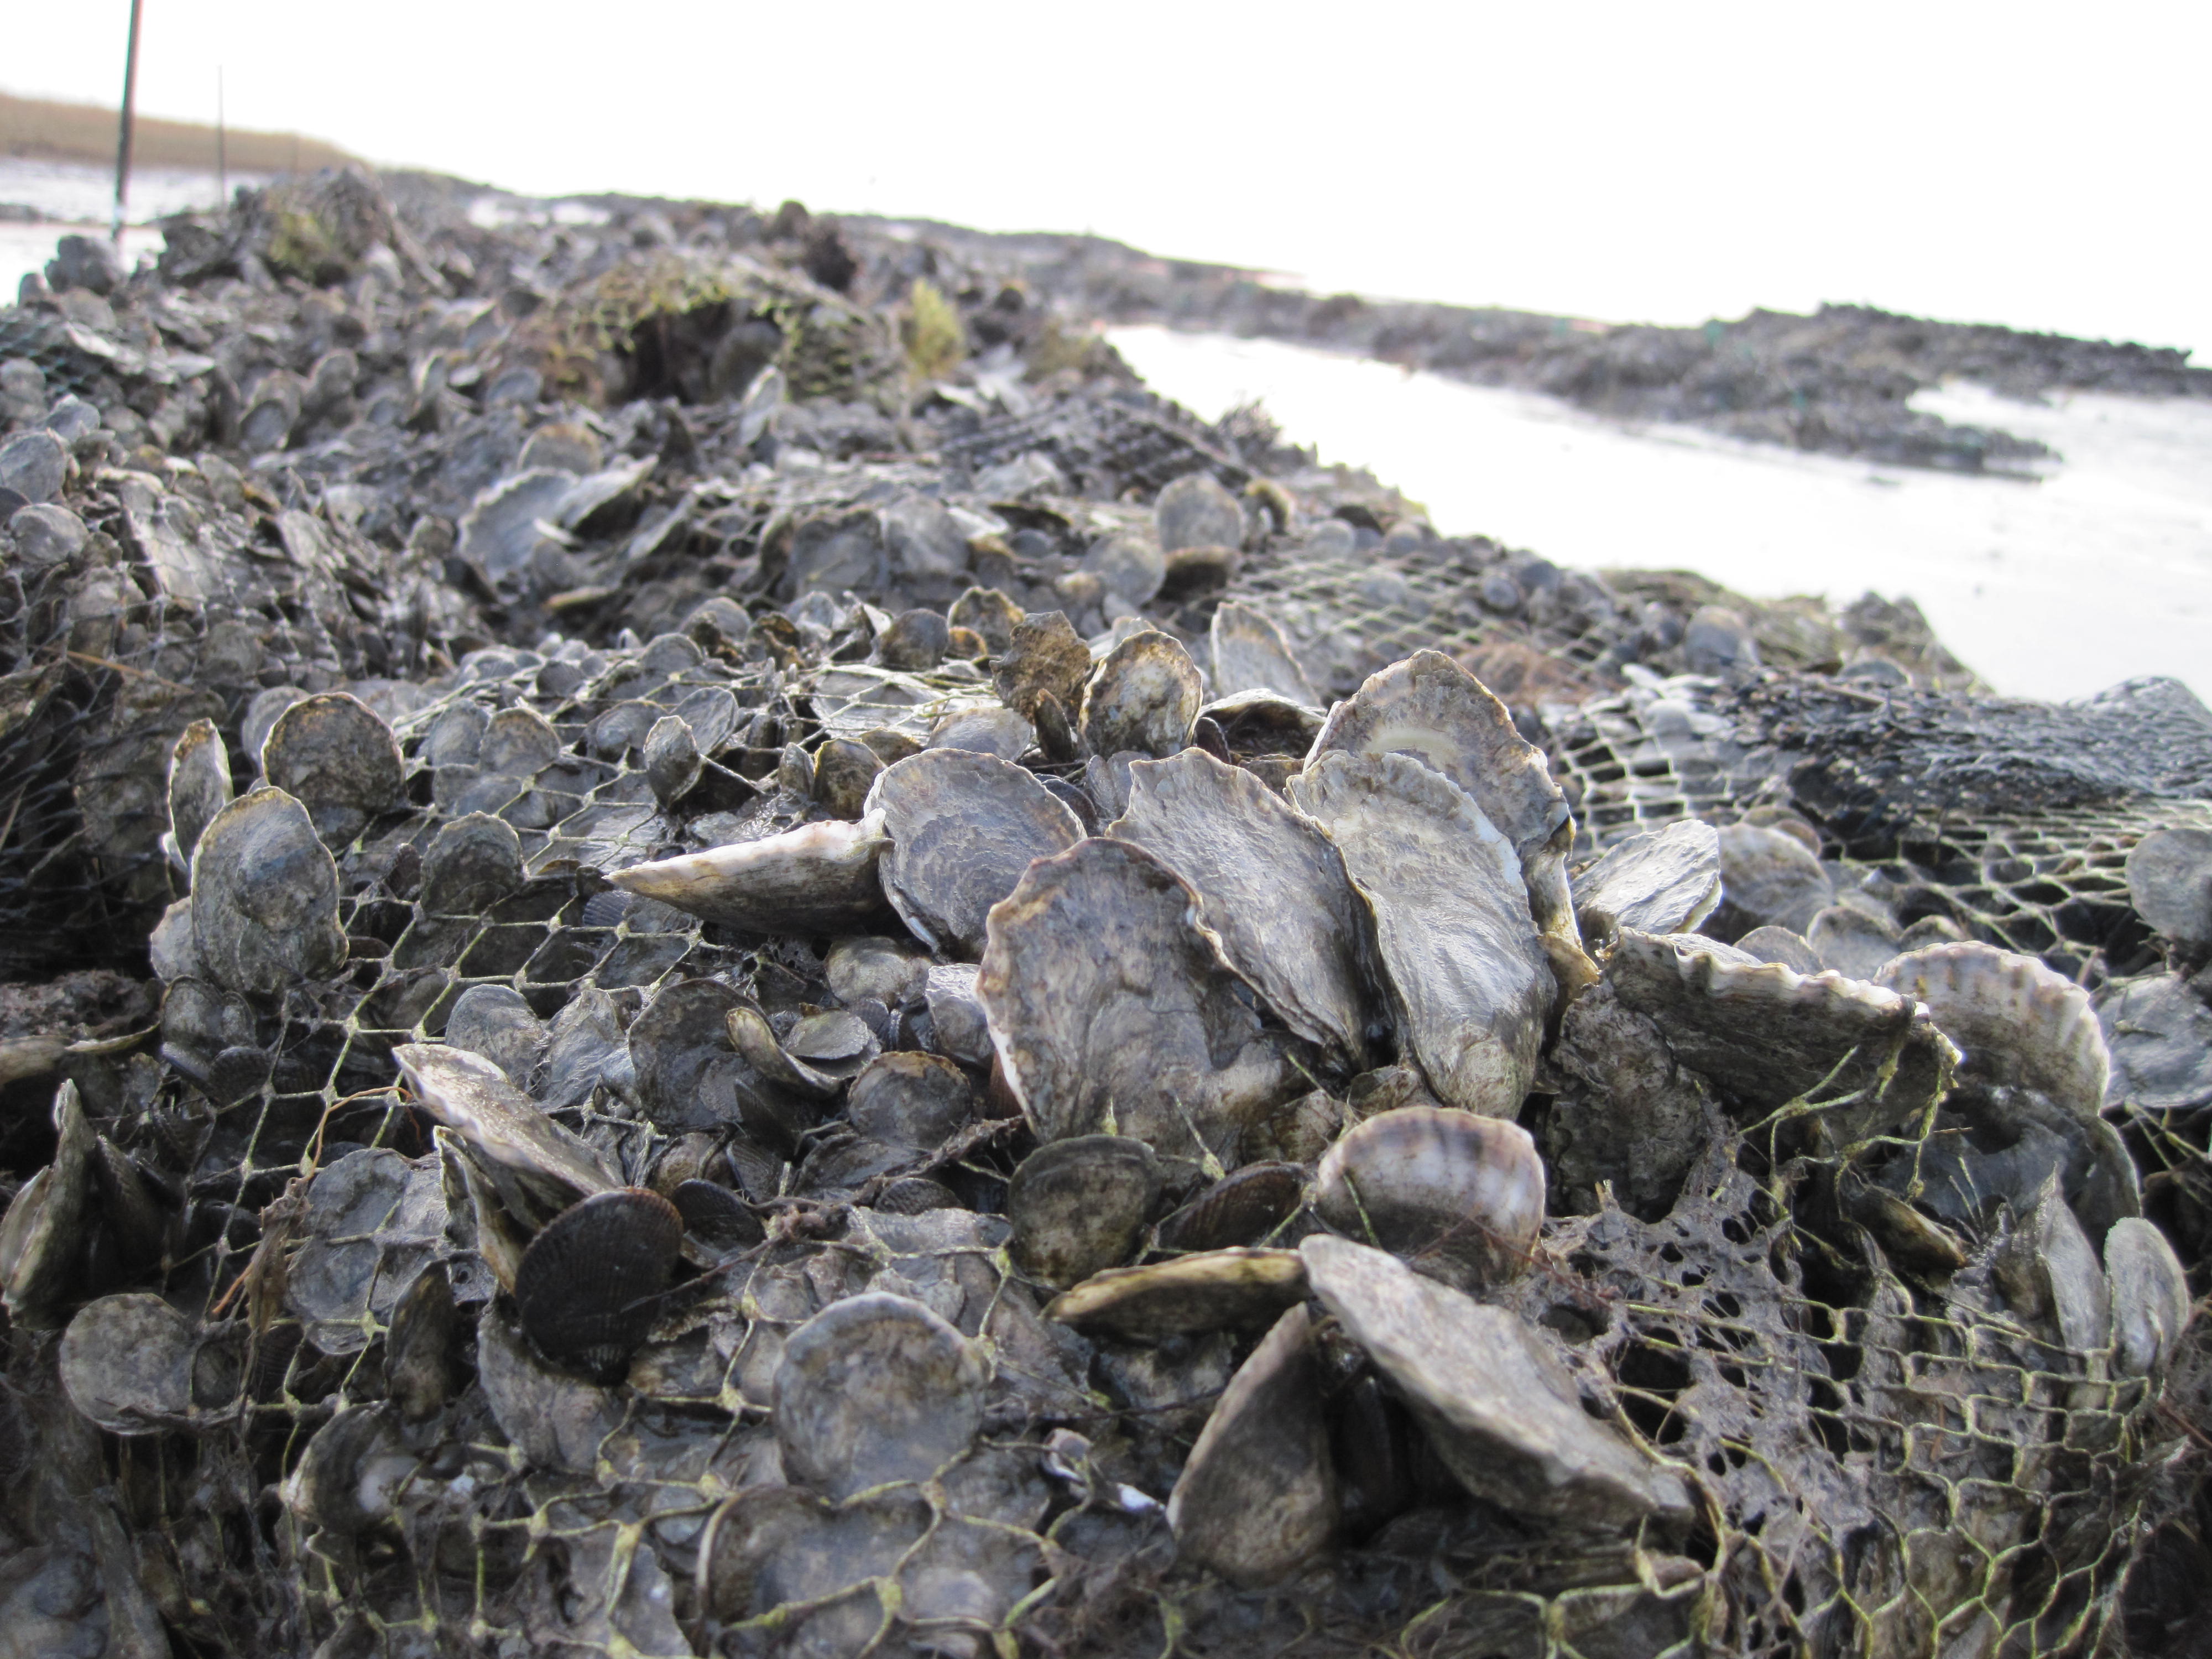 One and two year-old oysters growing on shell bag reef structures in the Delaware Bay as part of the Gandy's Beach Living Shoreline Project.